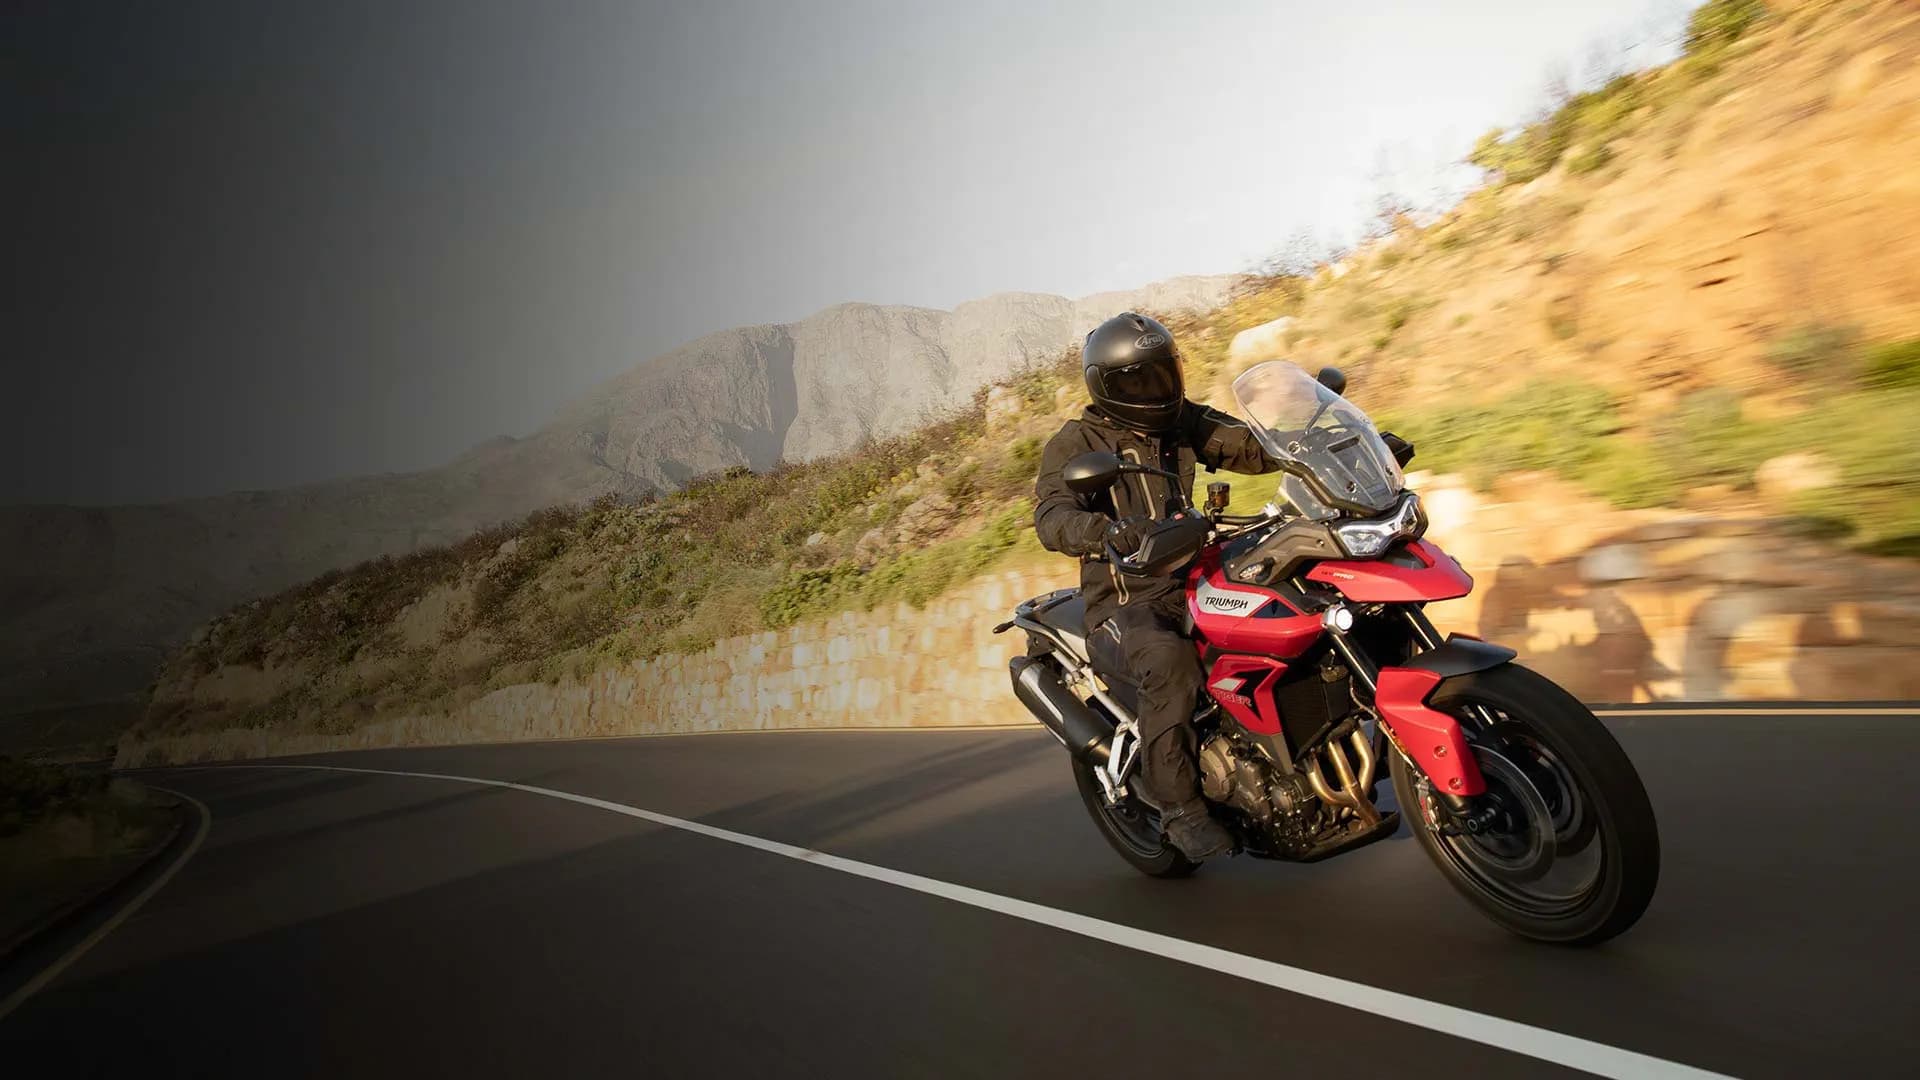 Korosi Red Triumph Tiger 900 GT Pro on a road-going adventure